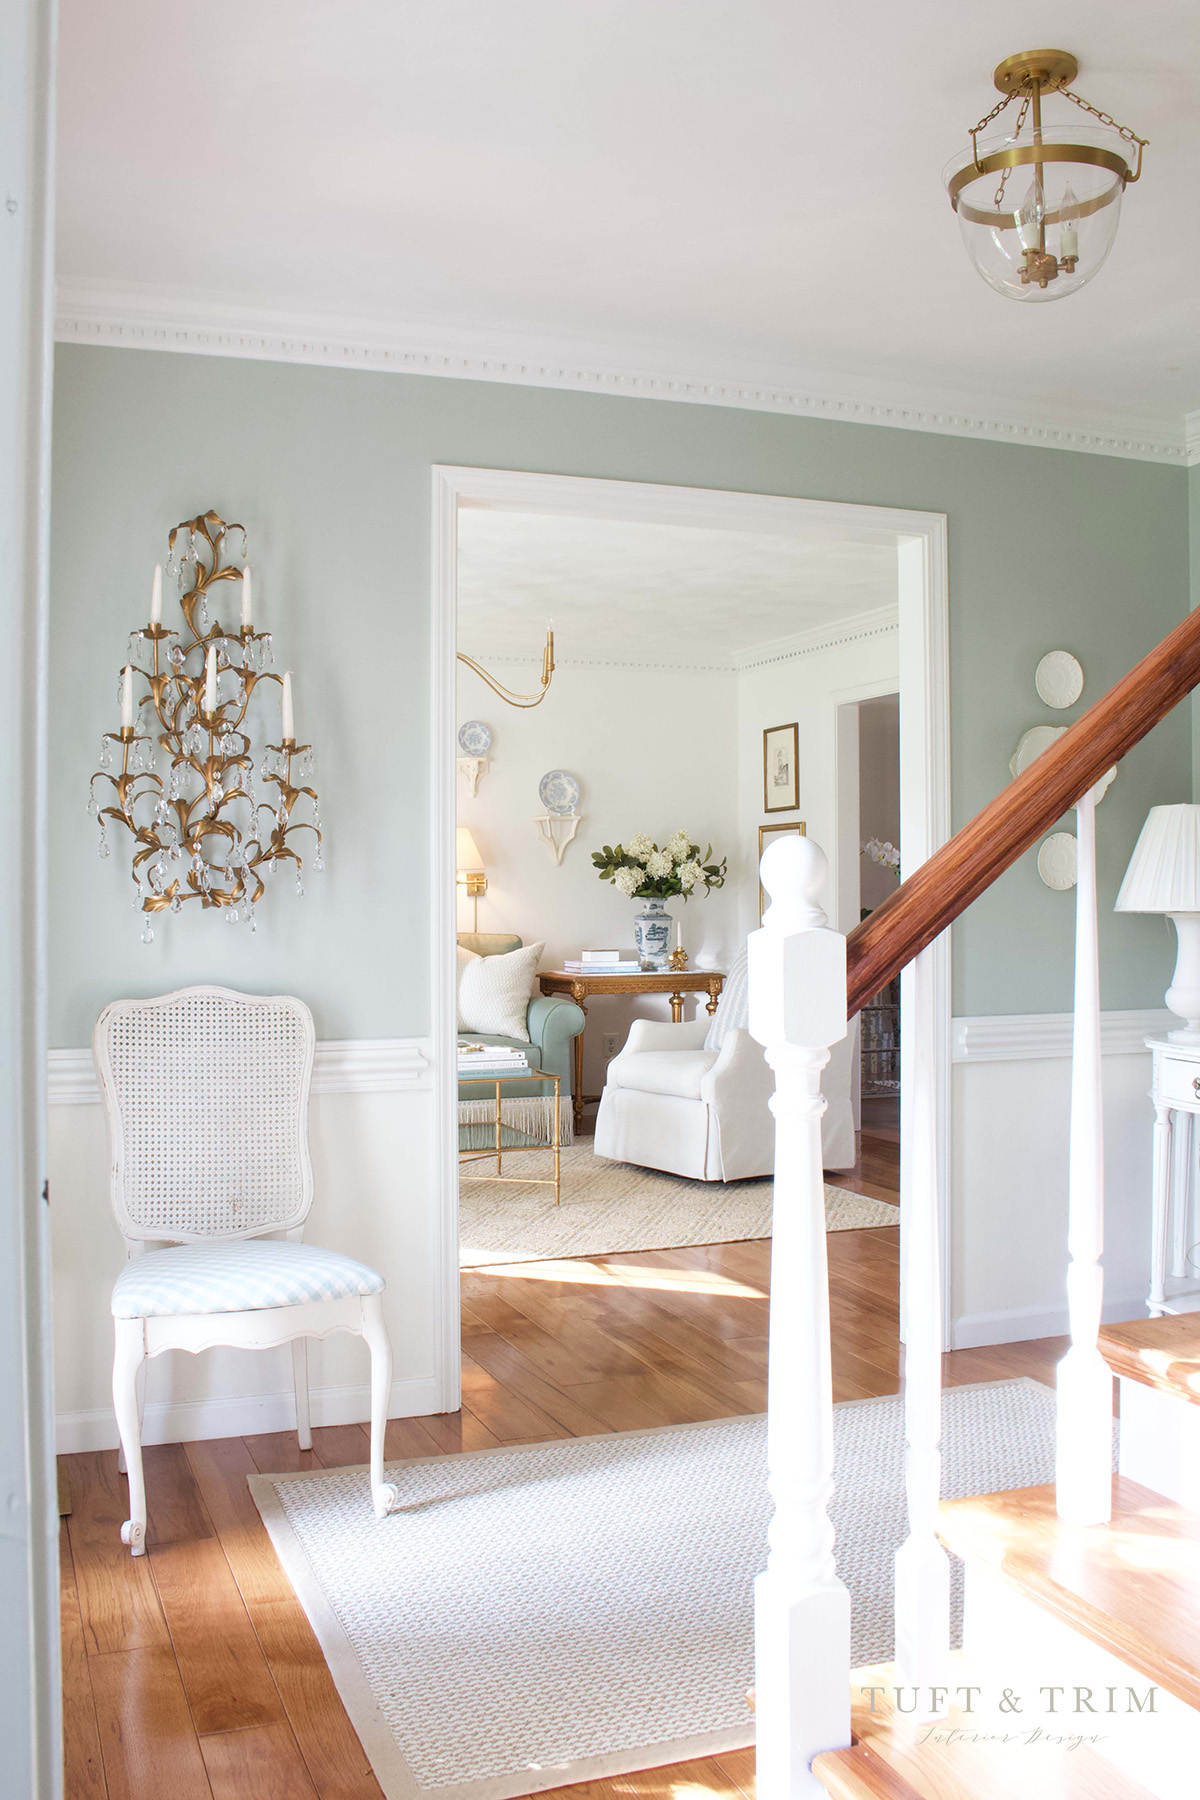 A Cape Cod Style Home Makeover: Before & After with Tuft & Trim Interior Design